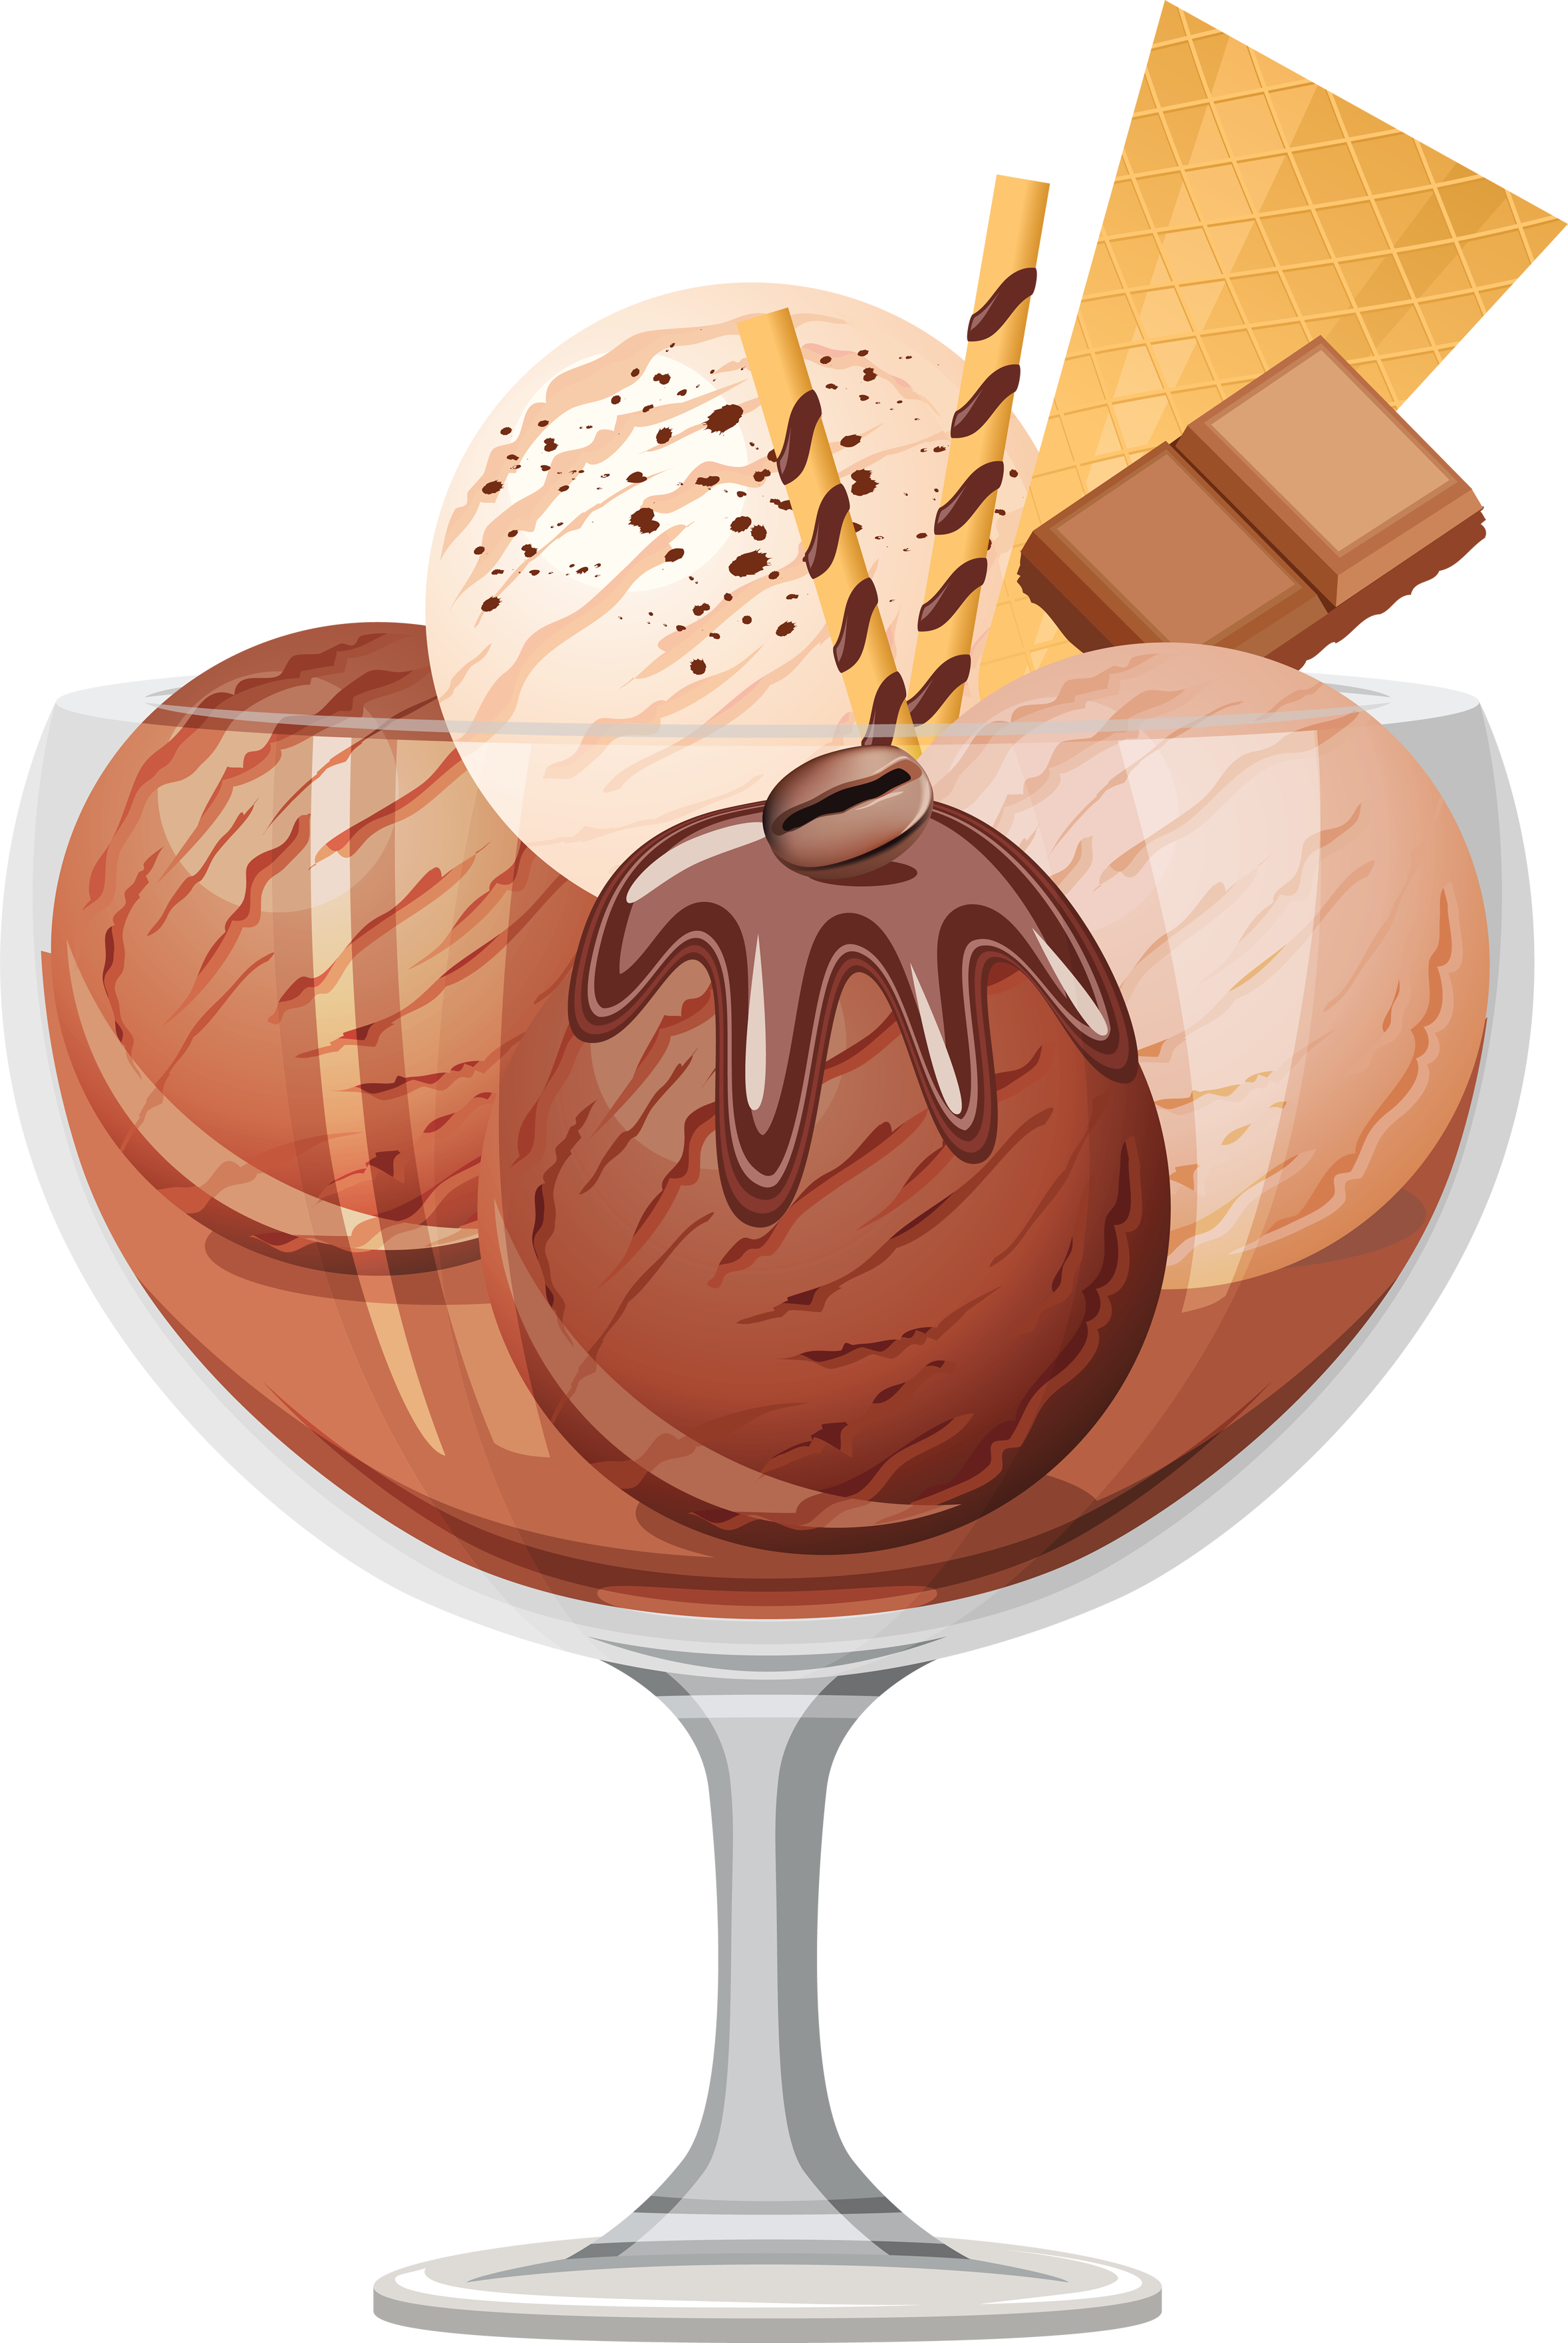 Waffle clipart high resolution. Chocolate ice cream png